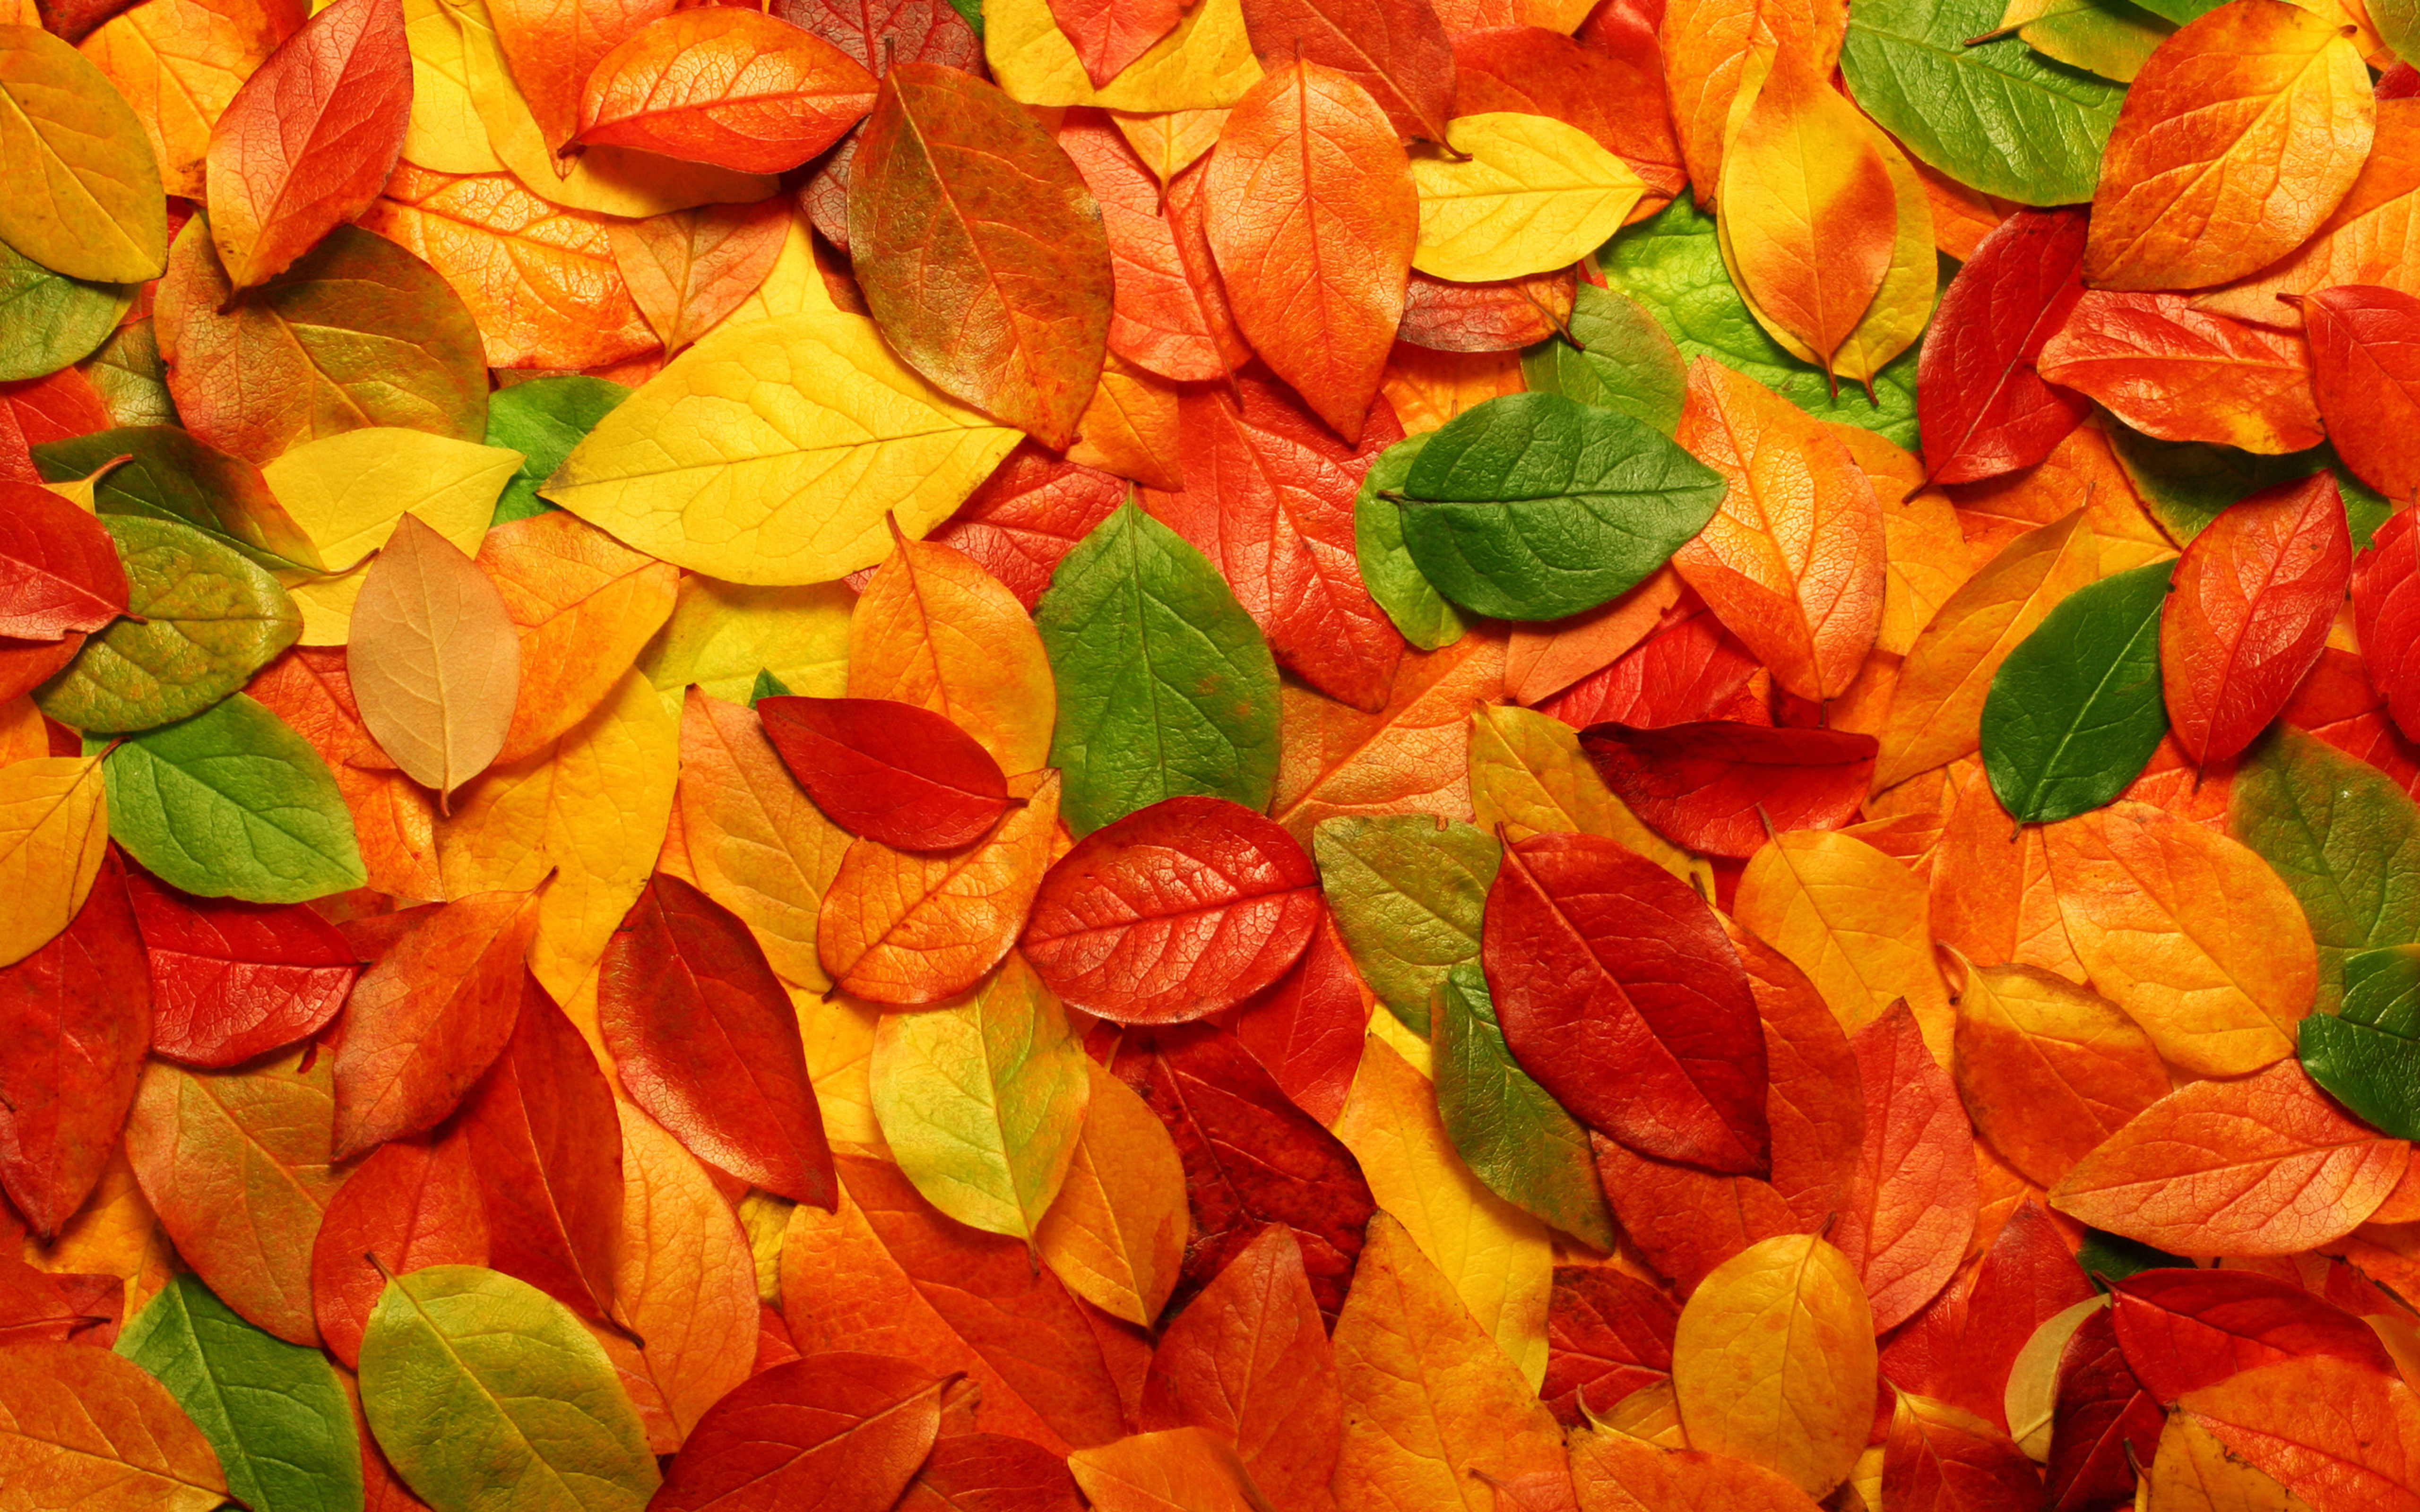 Wallpaper Download 5120x3200 Autumn blanket - copper-colored leaves